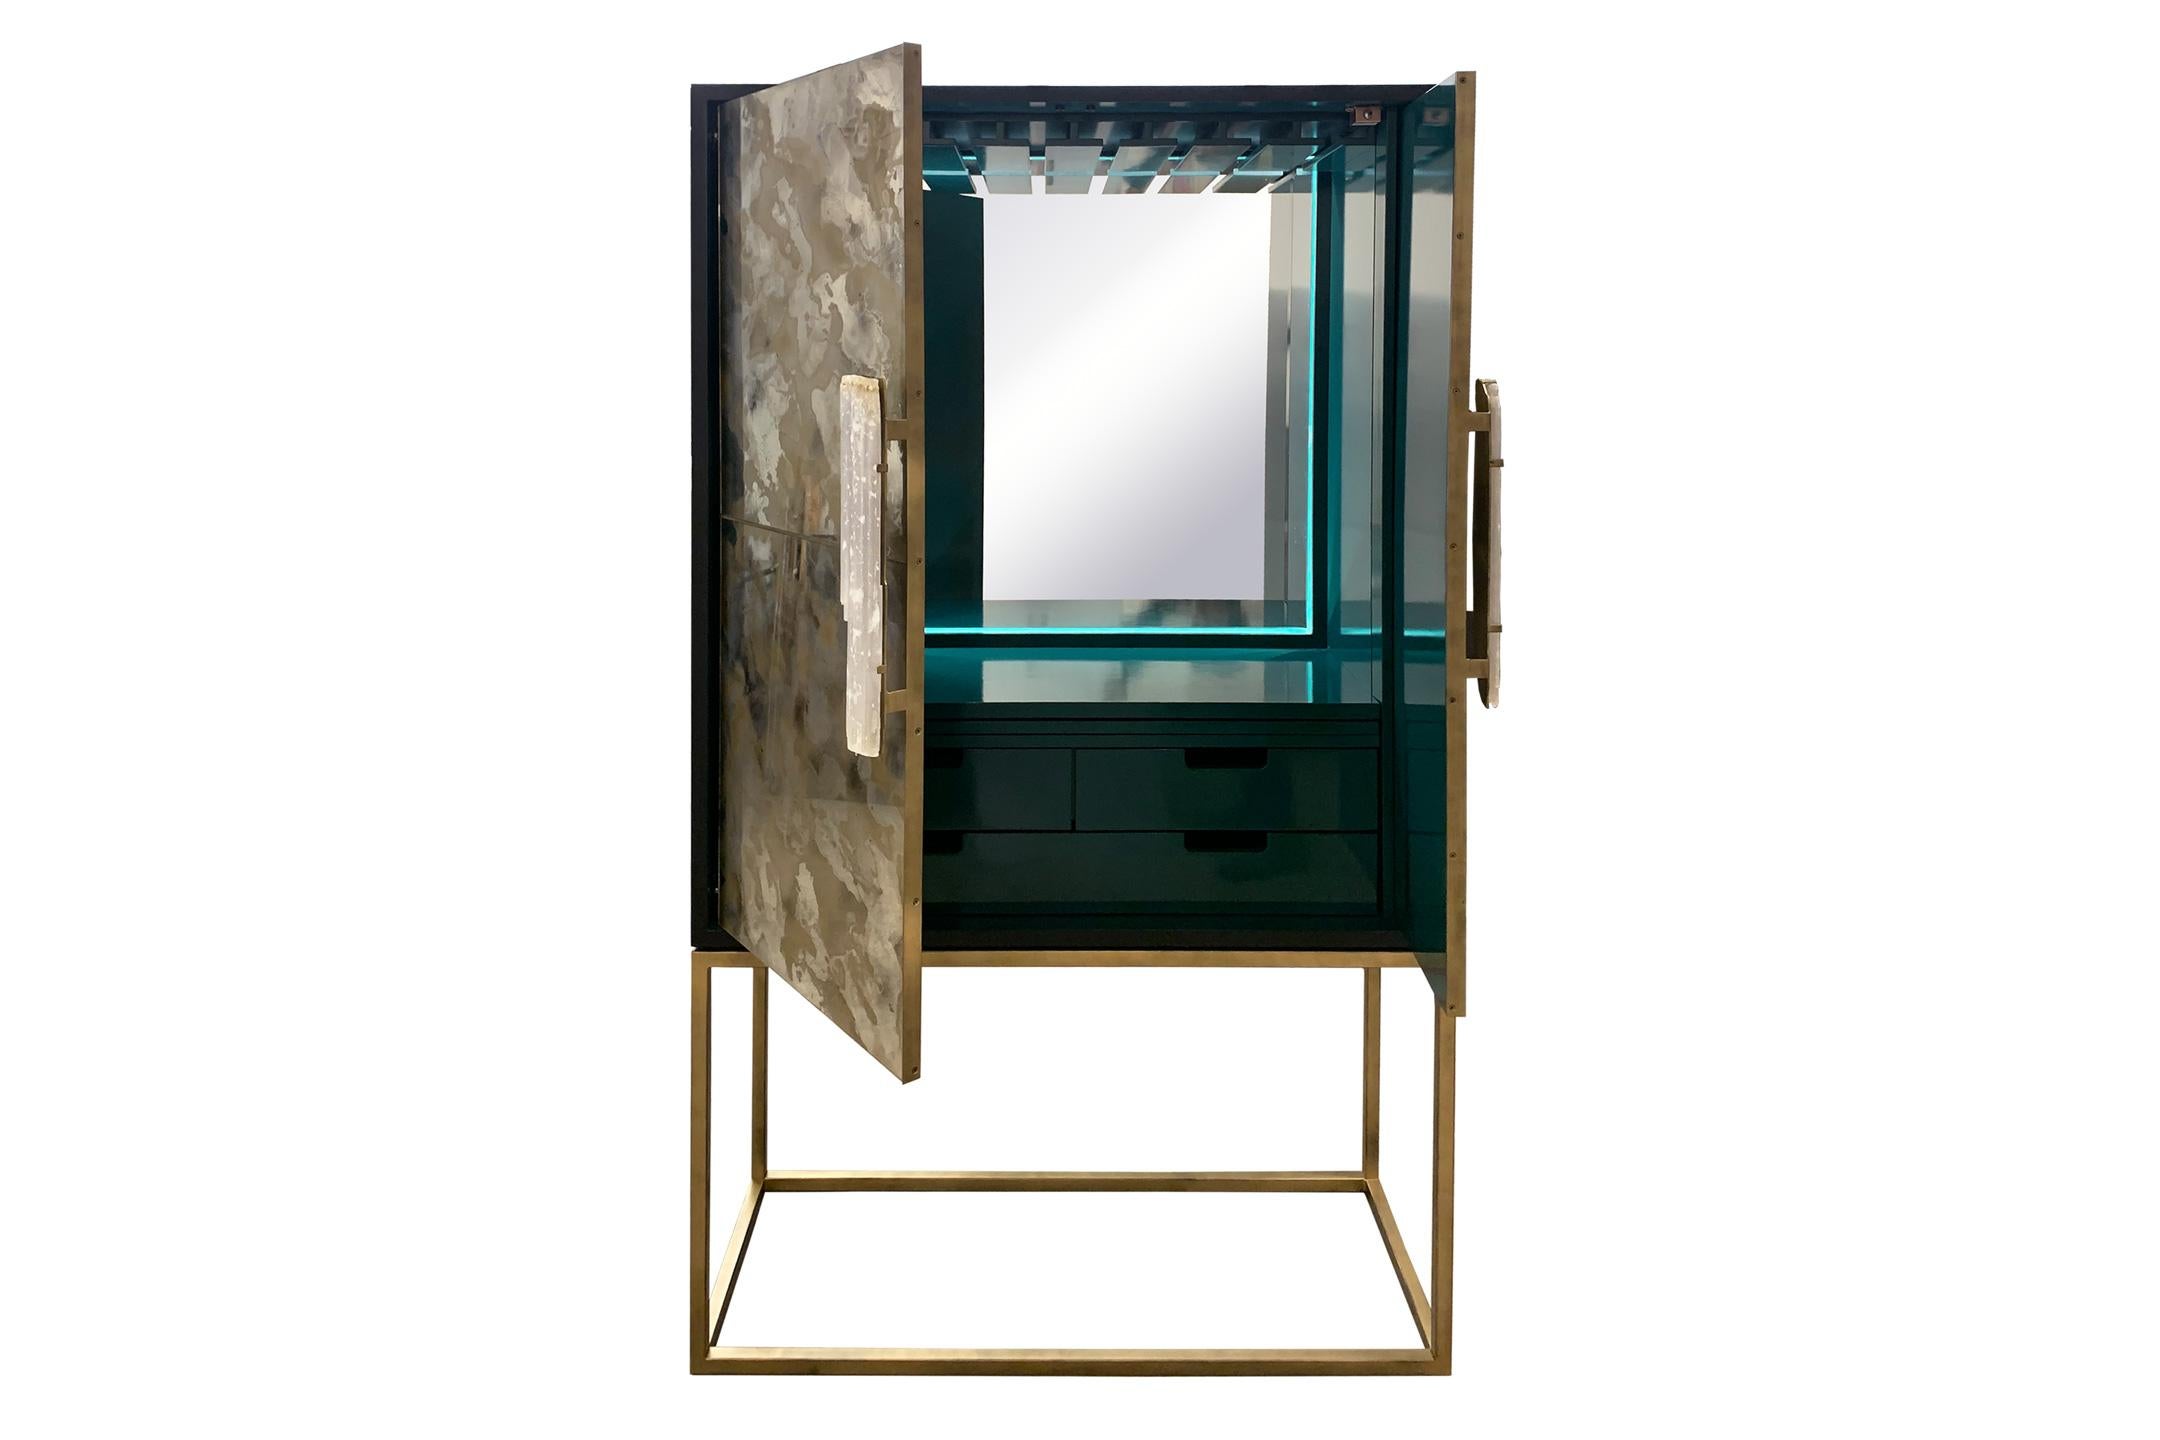 The gold dust bar cabinet by Ercole Home has a 2-door front, with matte black exterior and green lacquer interior wood finish.
Hand painted Églomisé mirror in gold dust decorates the surface with Selenite handles.
Hand forged metal framed doors,